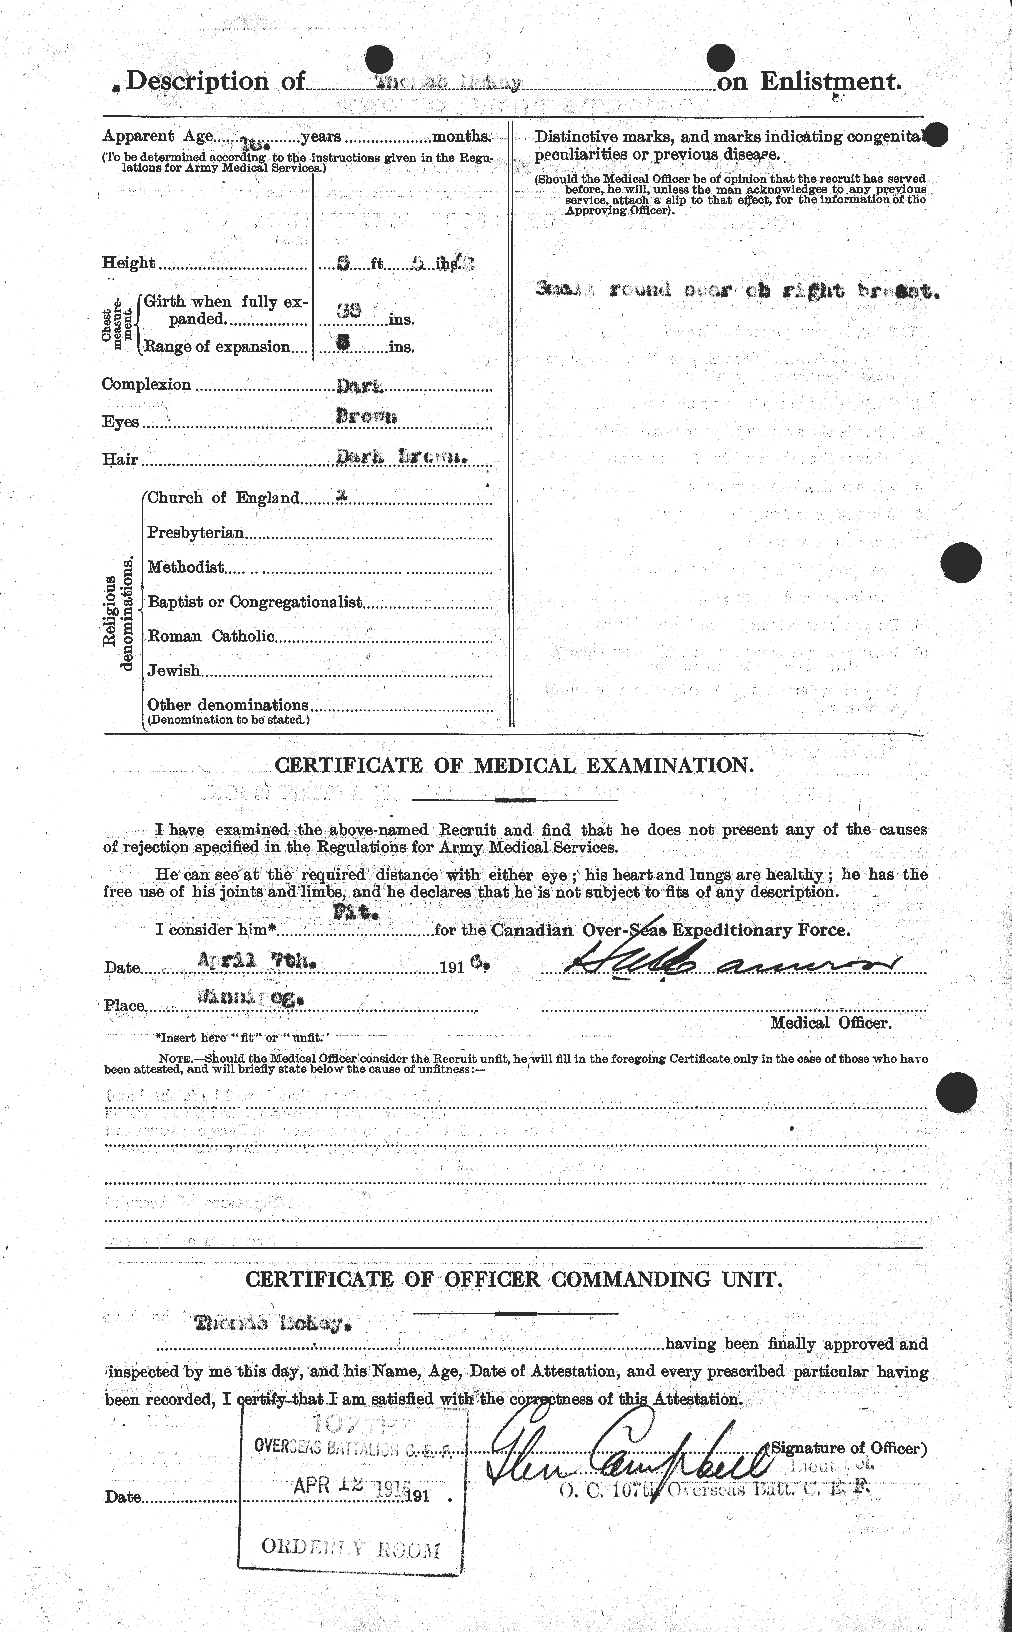 Personnel Records of the First World War - CEF 530159b